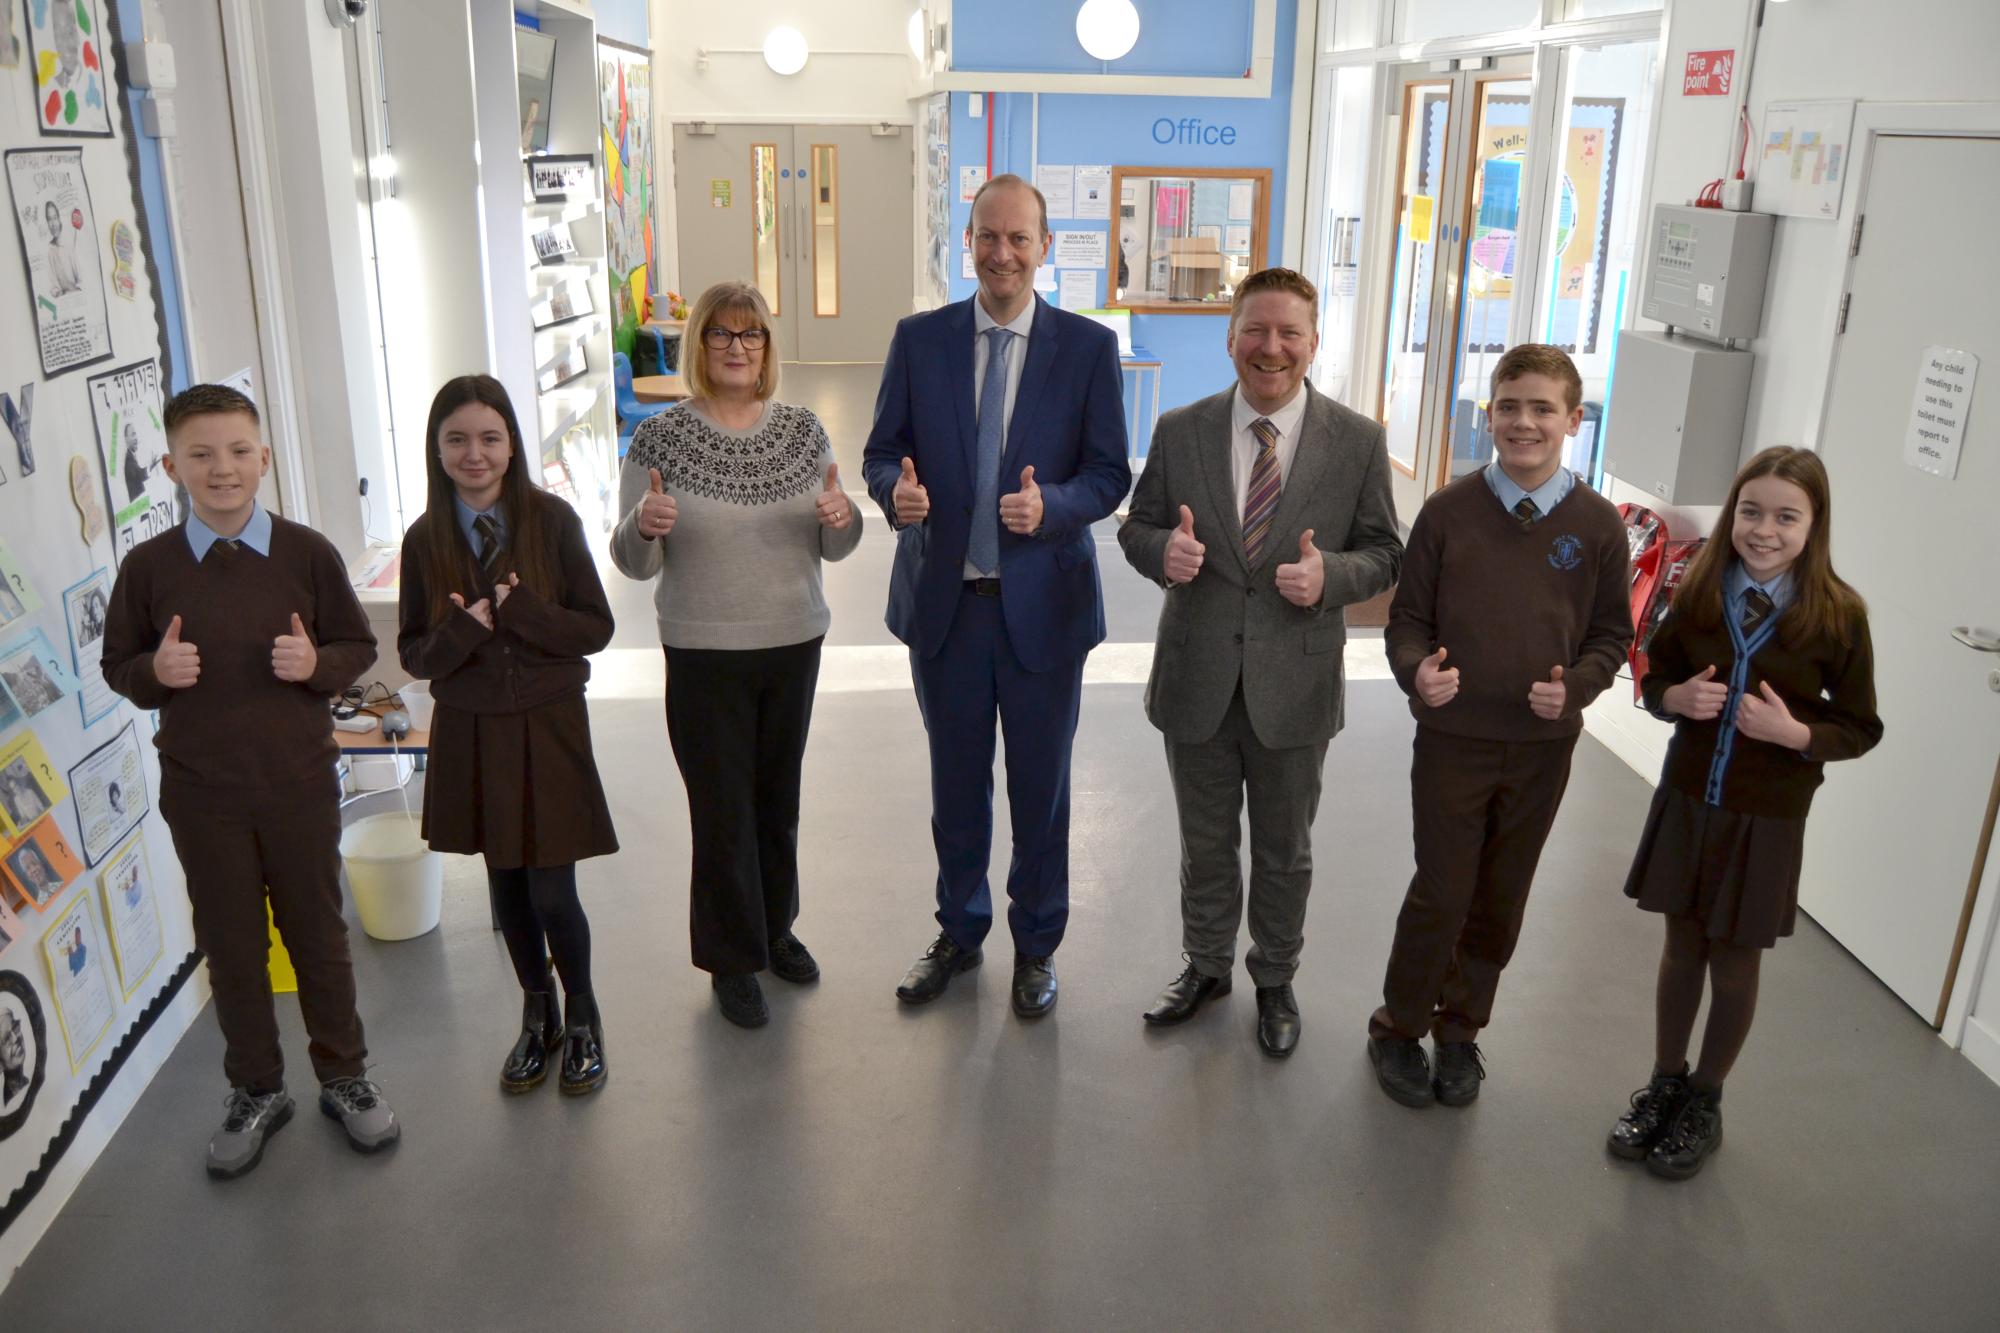 Holy Family pupils and head teacher giving thumbs up with inspectors